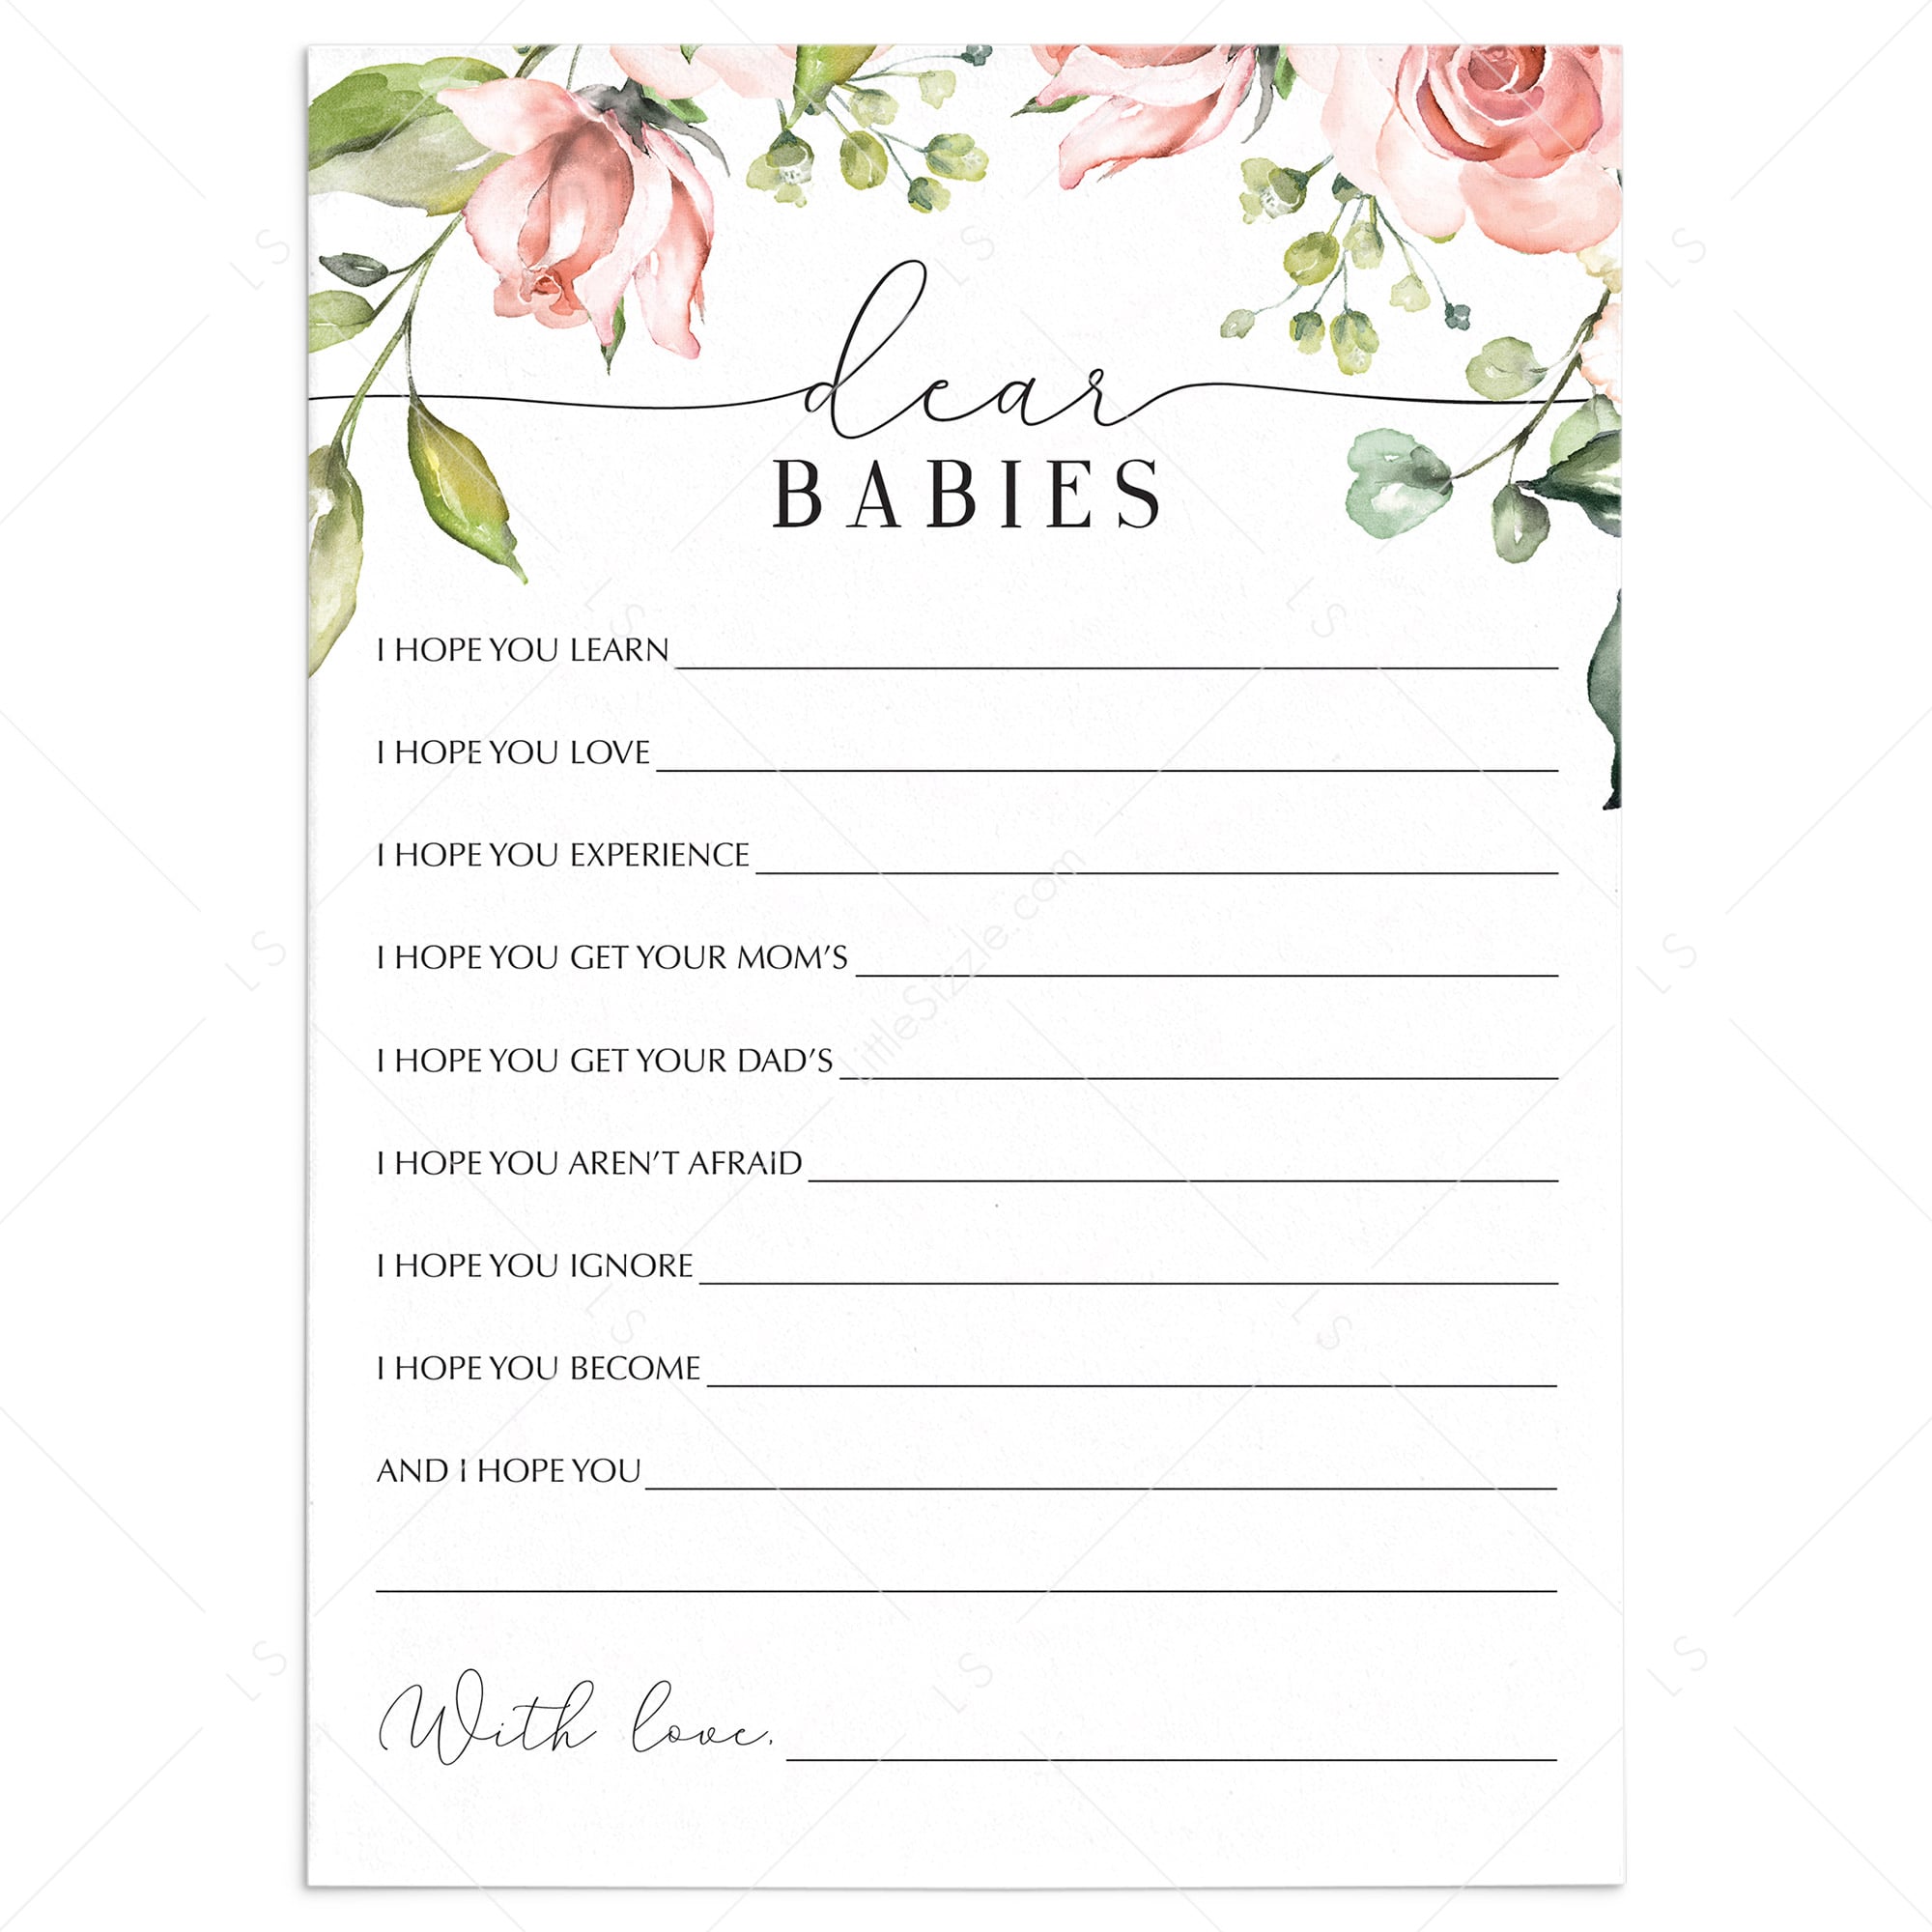 Dear babies twins baby shower games printable by LittleSizzle